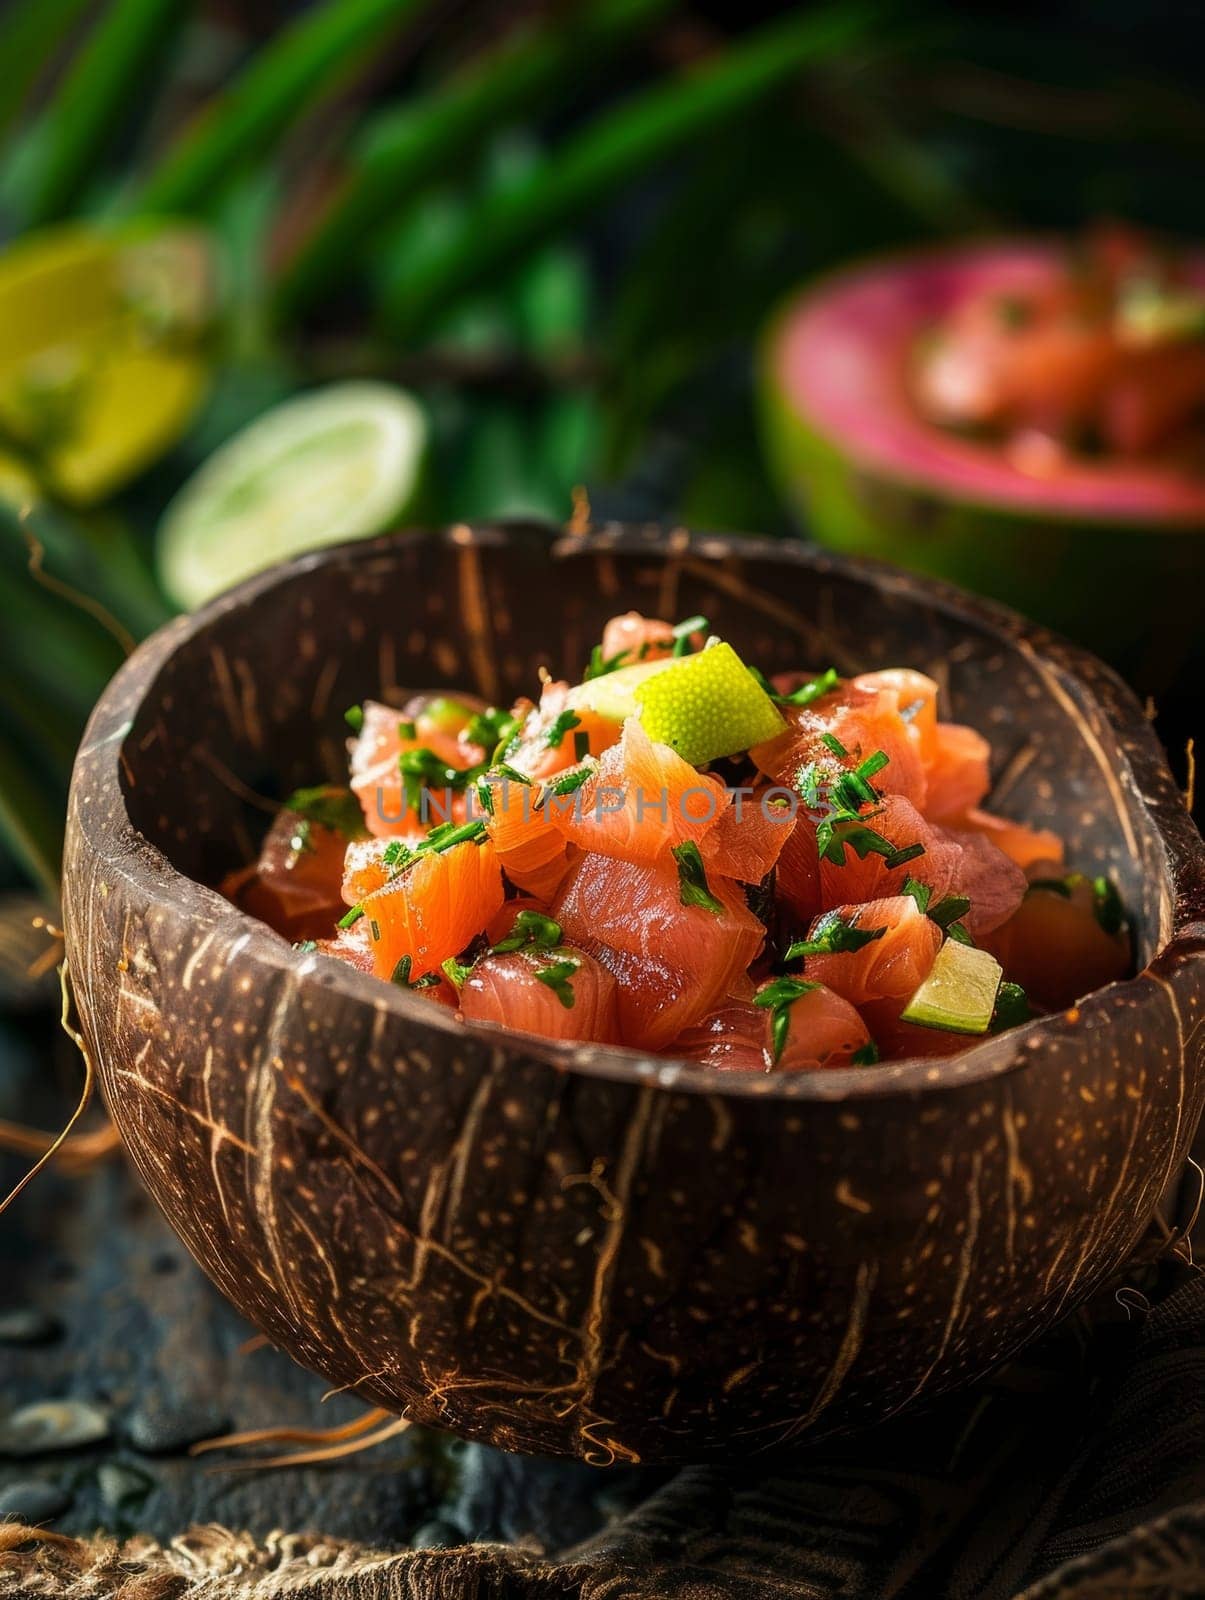 Authentic Fijian kokoda featuring fresh raw fish marinated in tangy lime juice and creamy coconut milk, served in a traditional coconut shell bowl. This vibrant and flavorful Pacific island dish. by sfinks